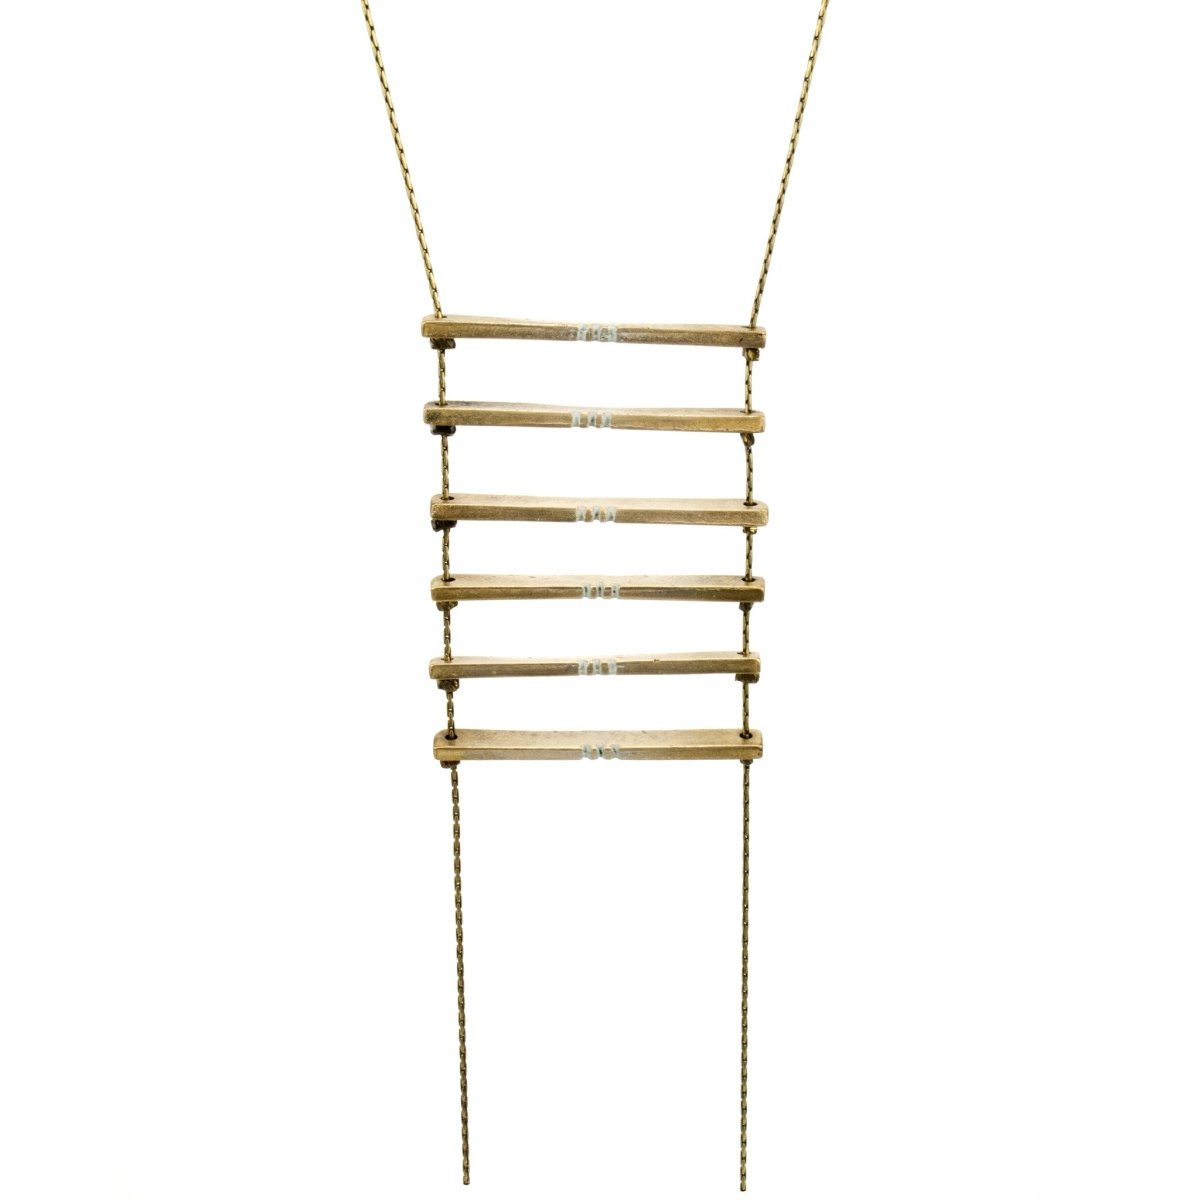 Long necklace with hand painted bronze bars.